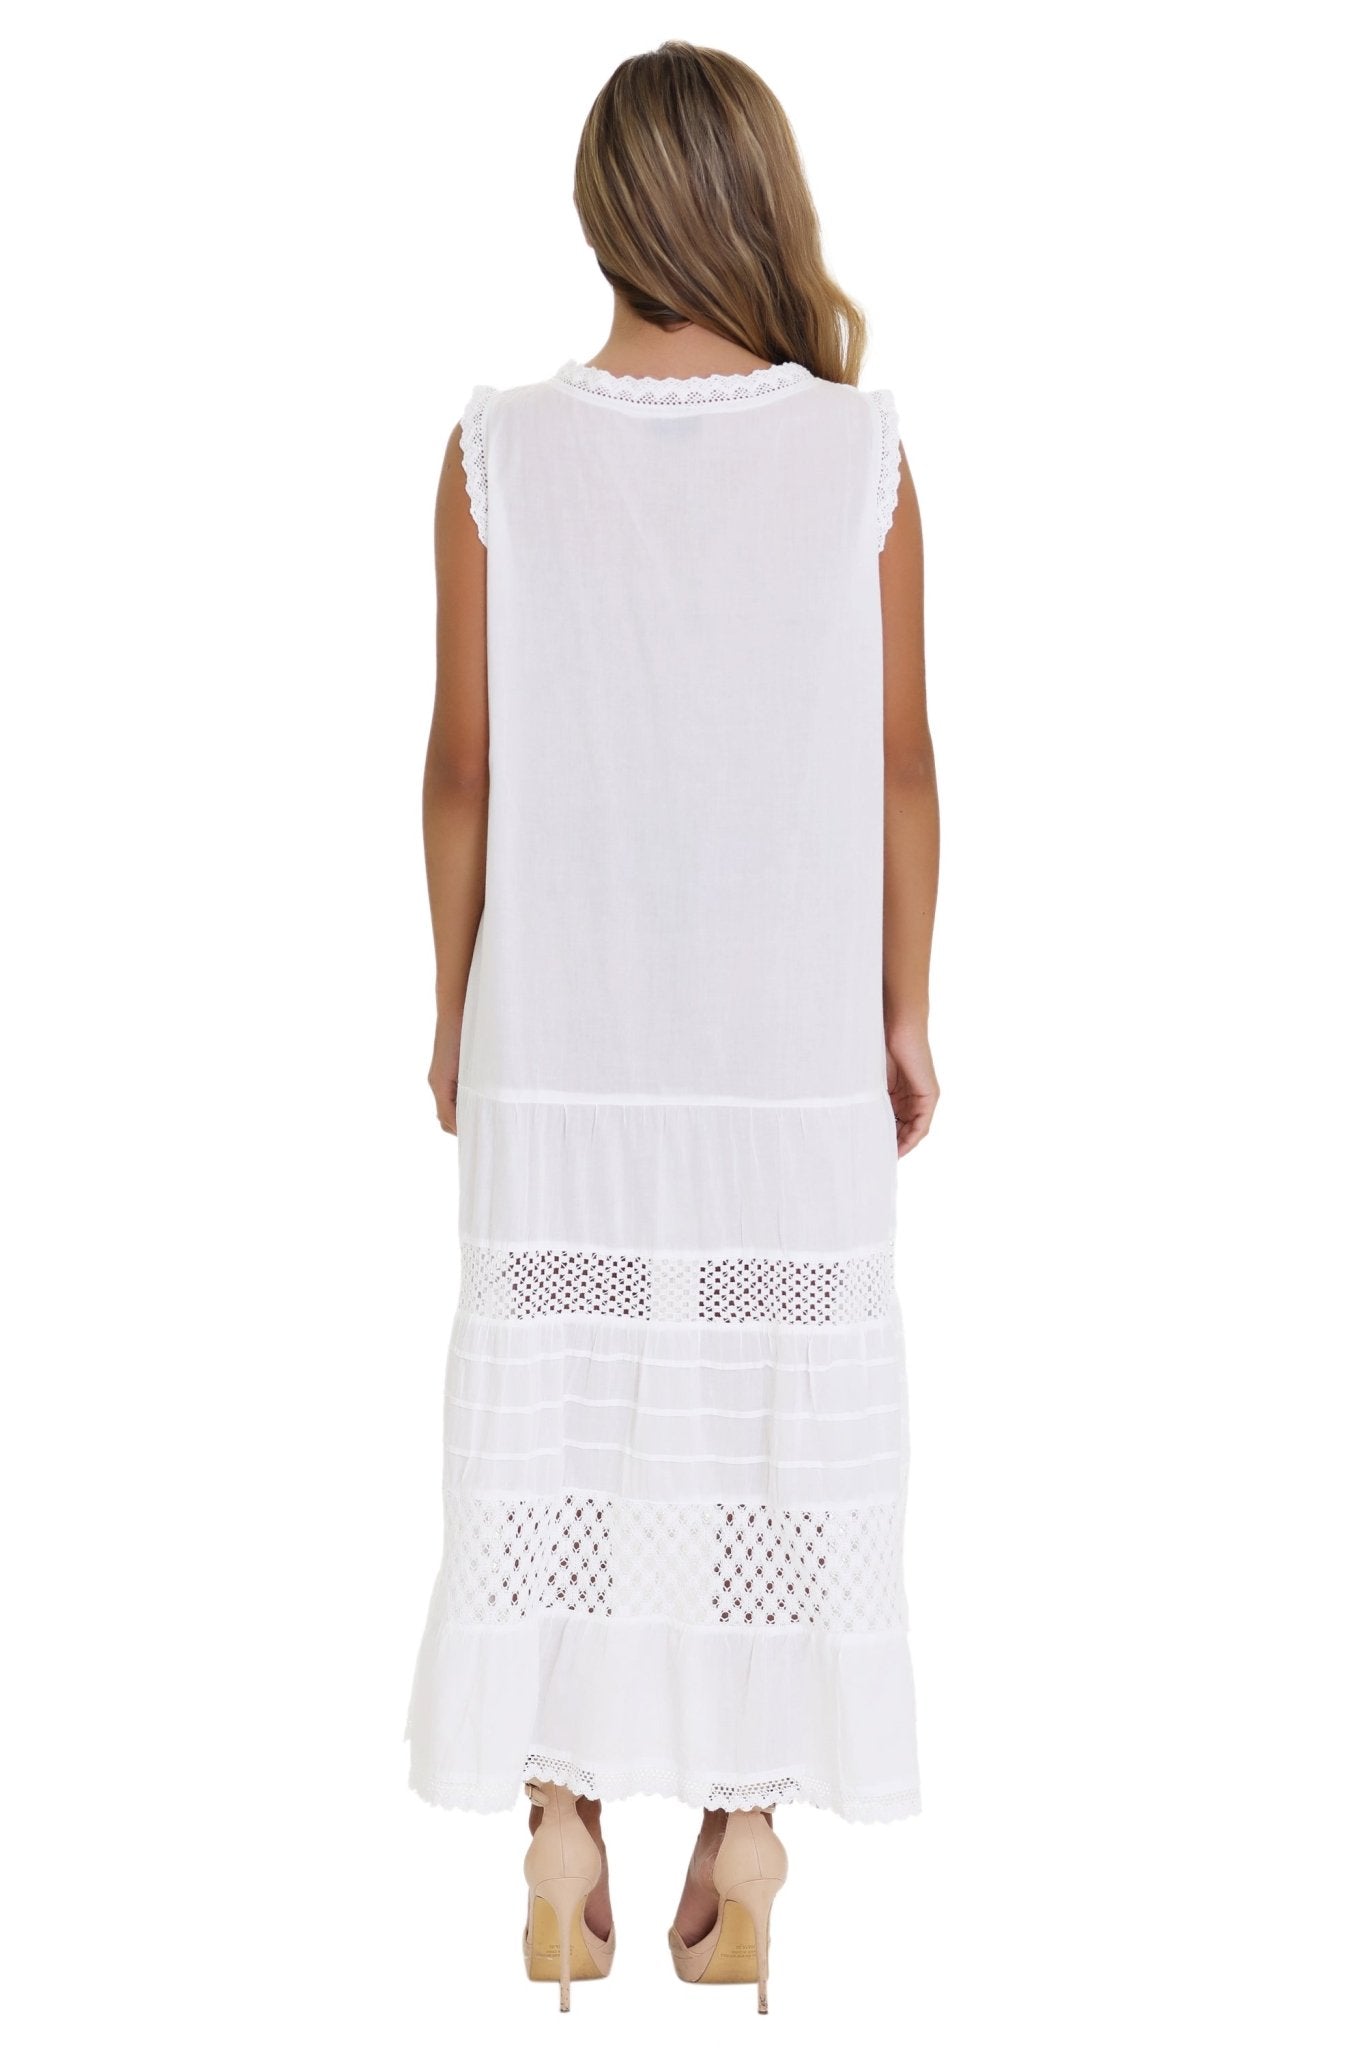 Sleeveless White Embroidered Dress WD-21111 - Advance Apparels Inc